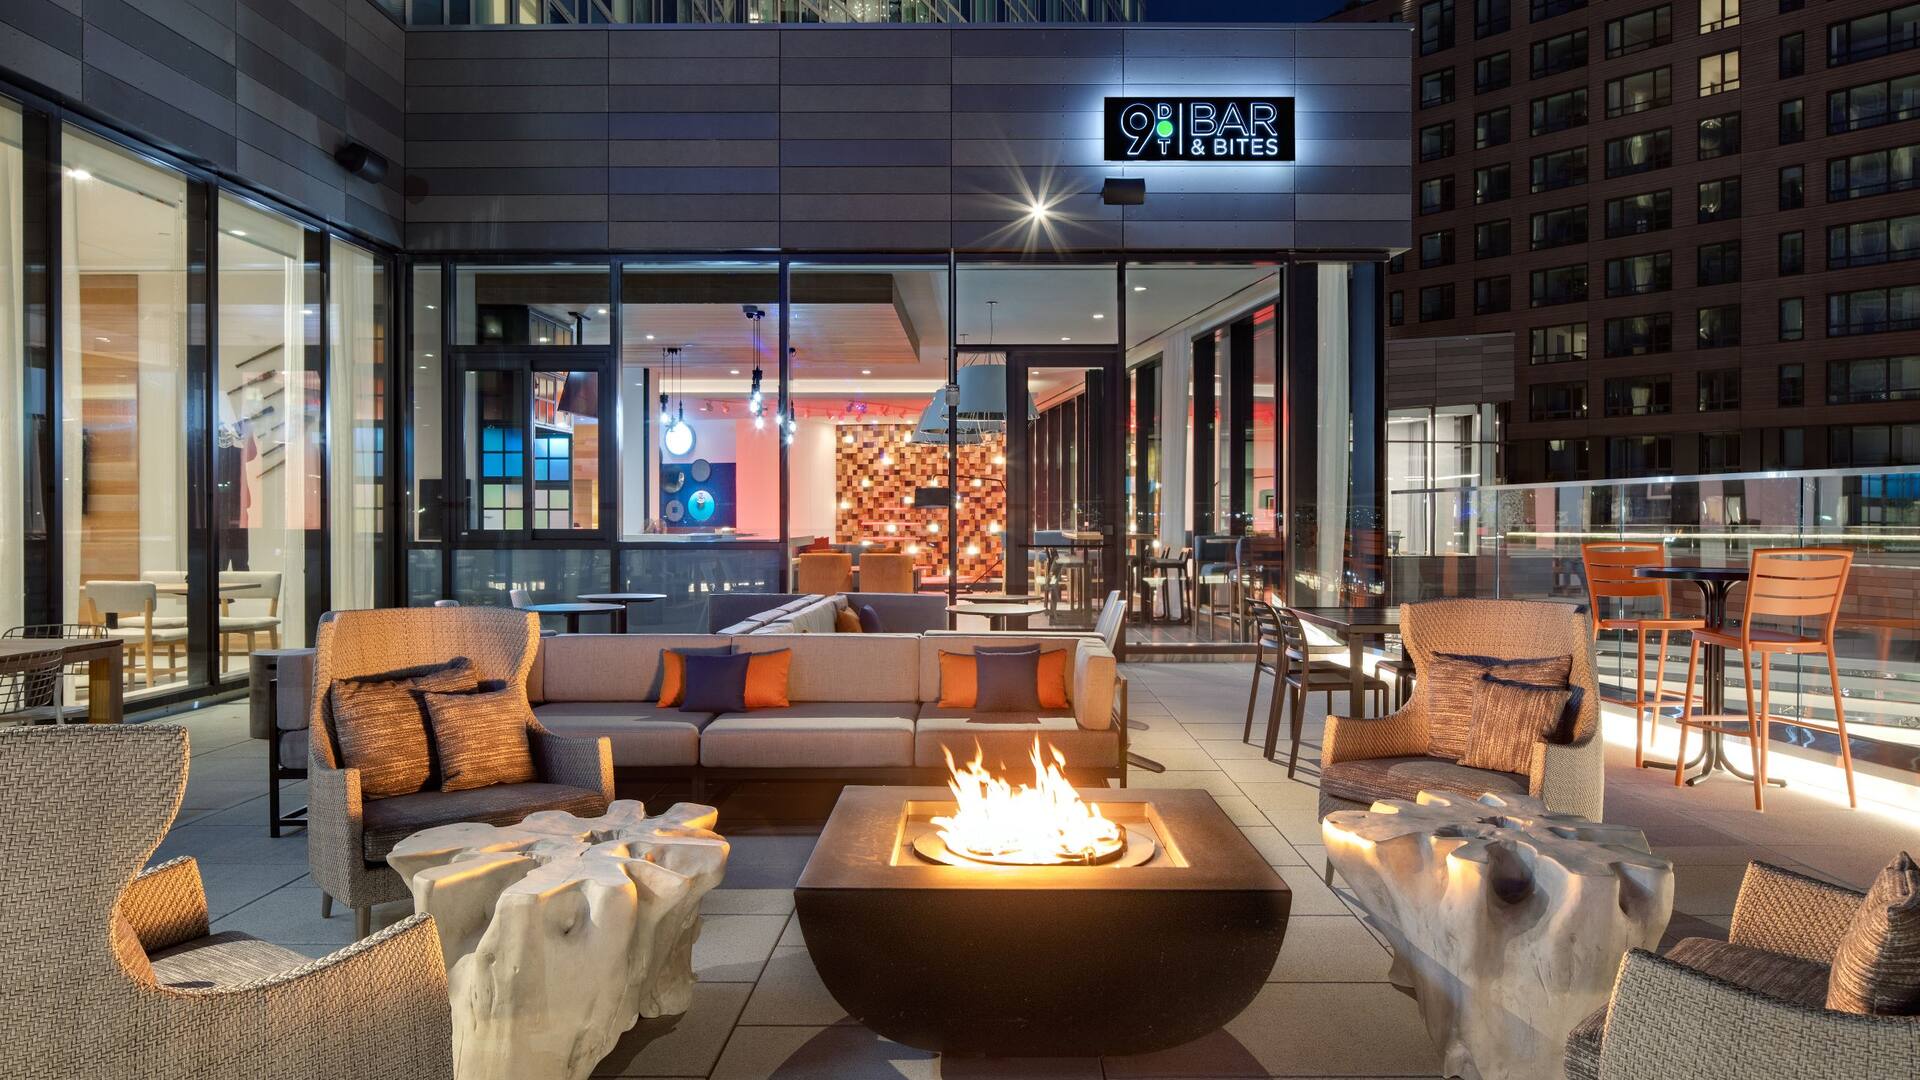 Hyatt Place Boston / Seaport DistrictNews and Events